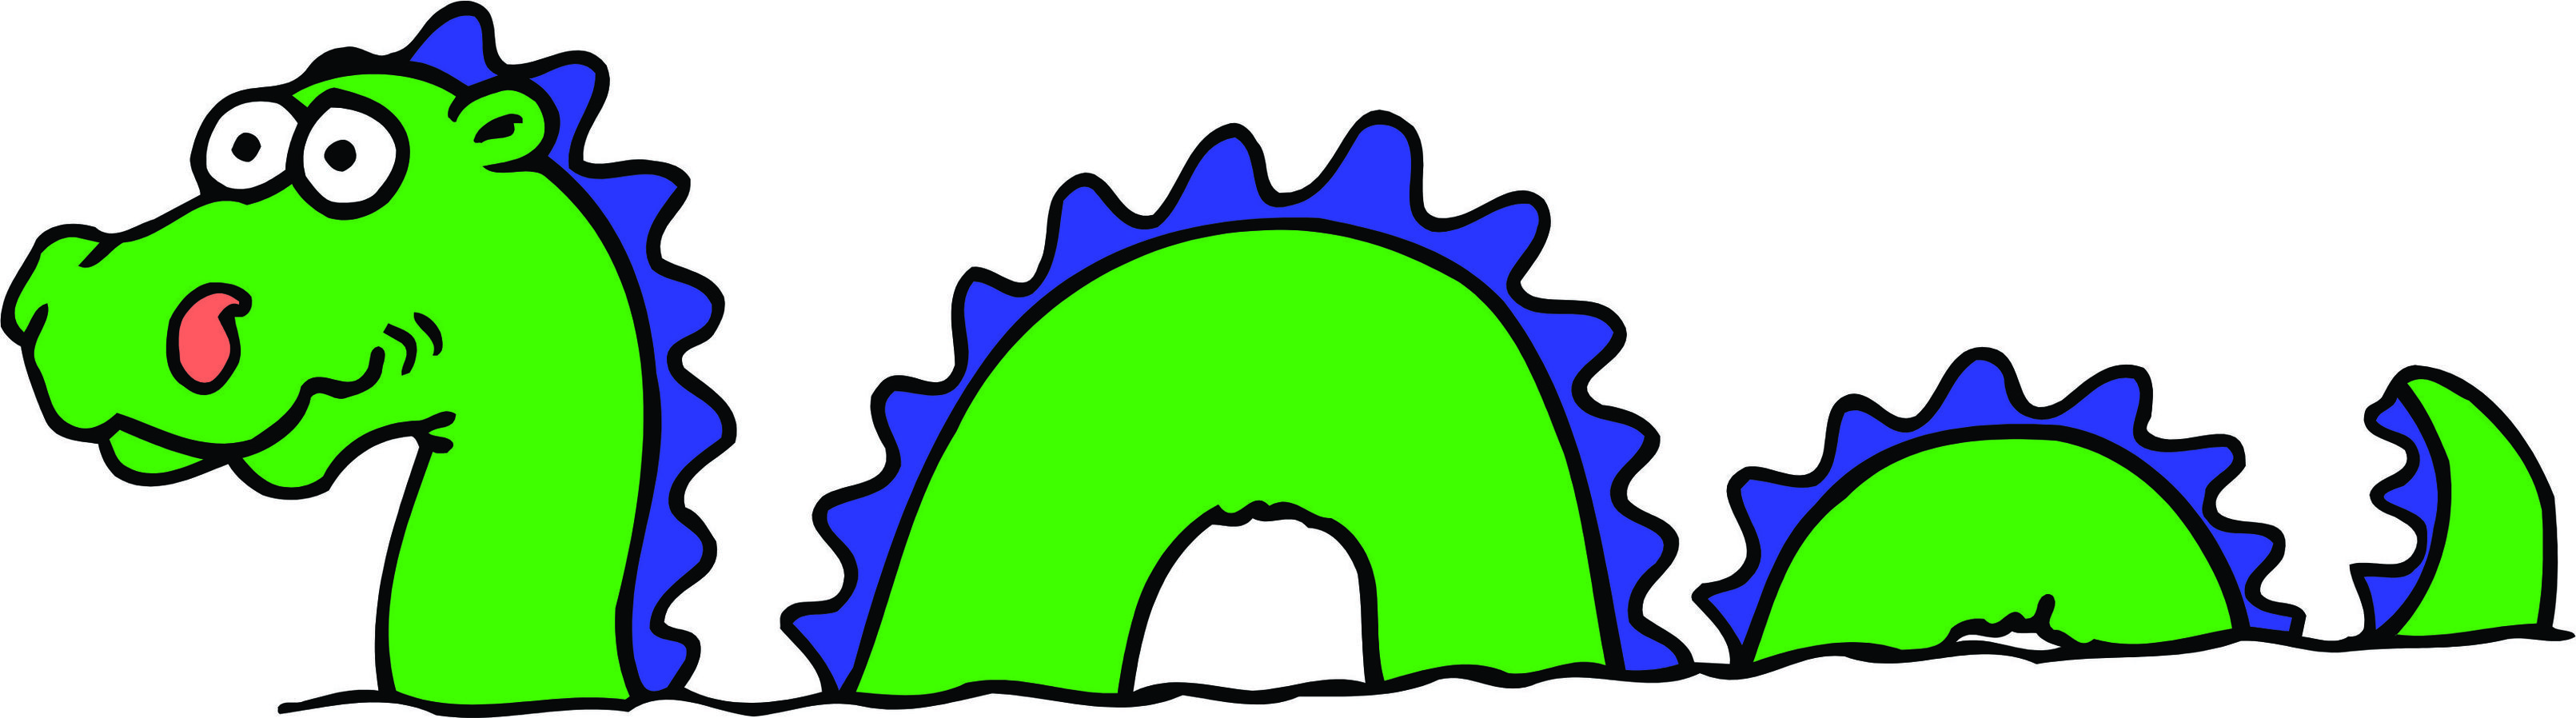 Loch Ness Monster Cartoon Clipart - Free to use Clip Art Resource